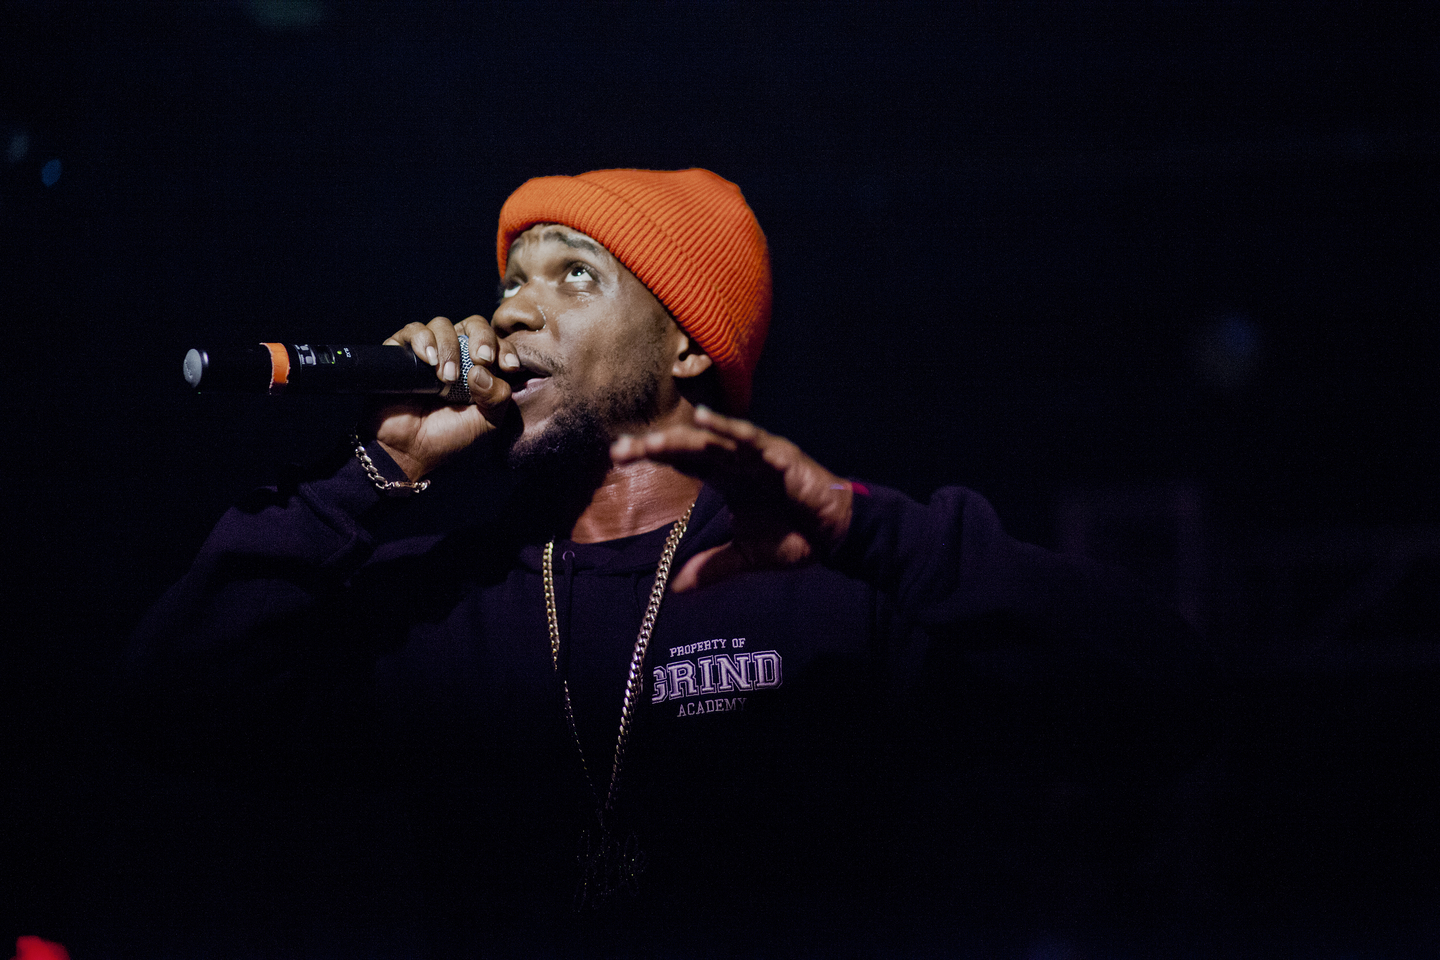 Curren$y. Photo by Young Park